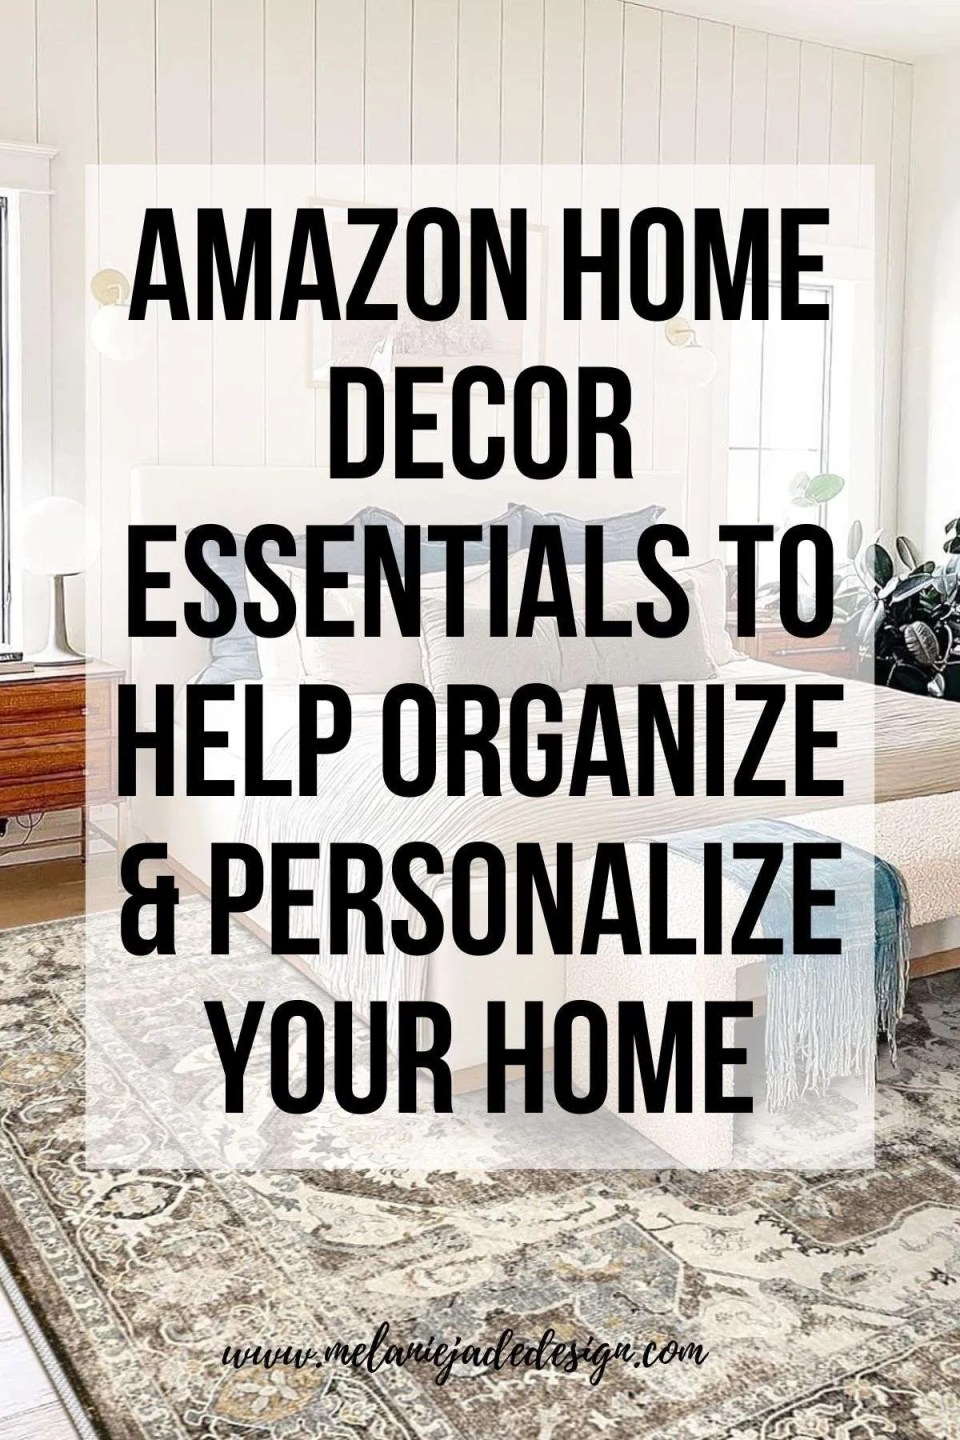 Amazon Home Decor Essentials to Help Organize and Personalize Your Home Pinterest pin